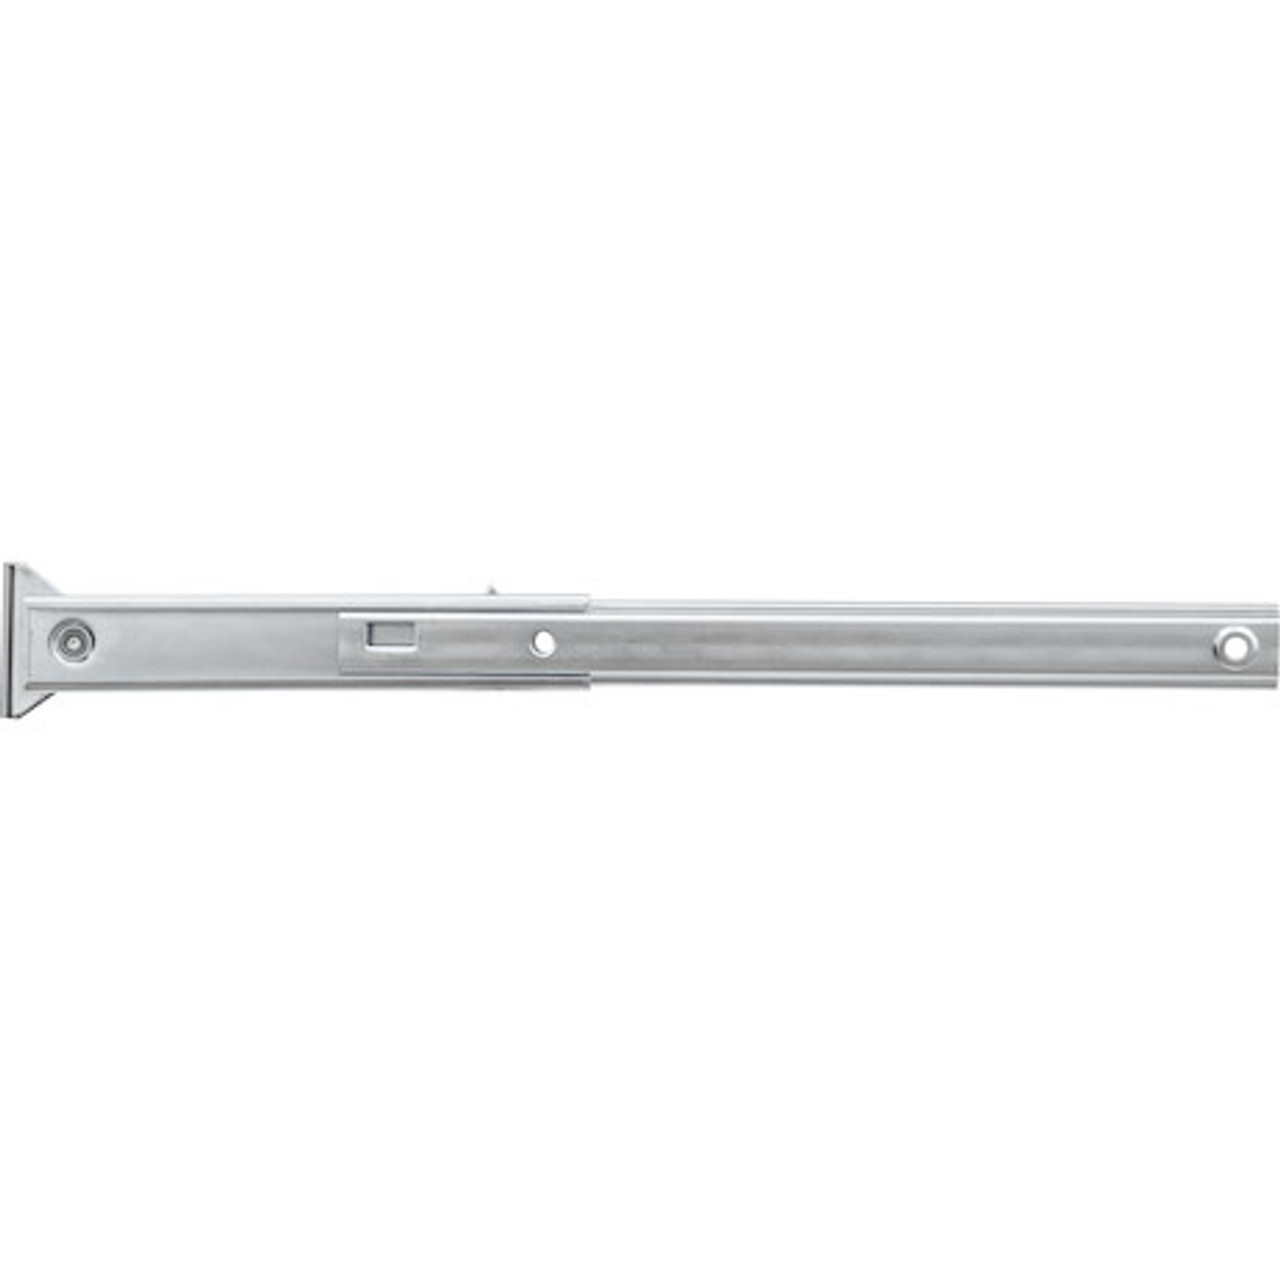 102406002 - Telescoping Door and Lid Prop, Single Mounting Clamp - 18.5 Inch Extended/13.25 Inch Retracted